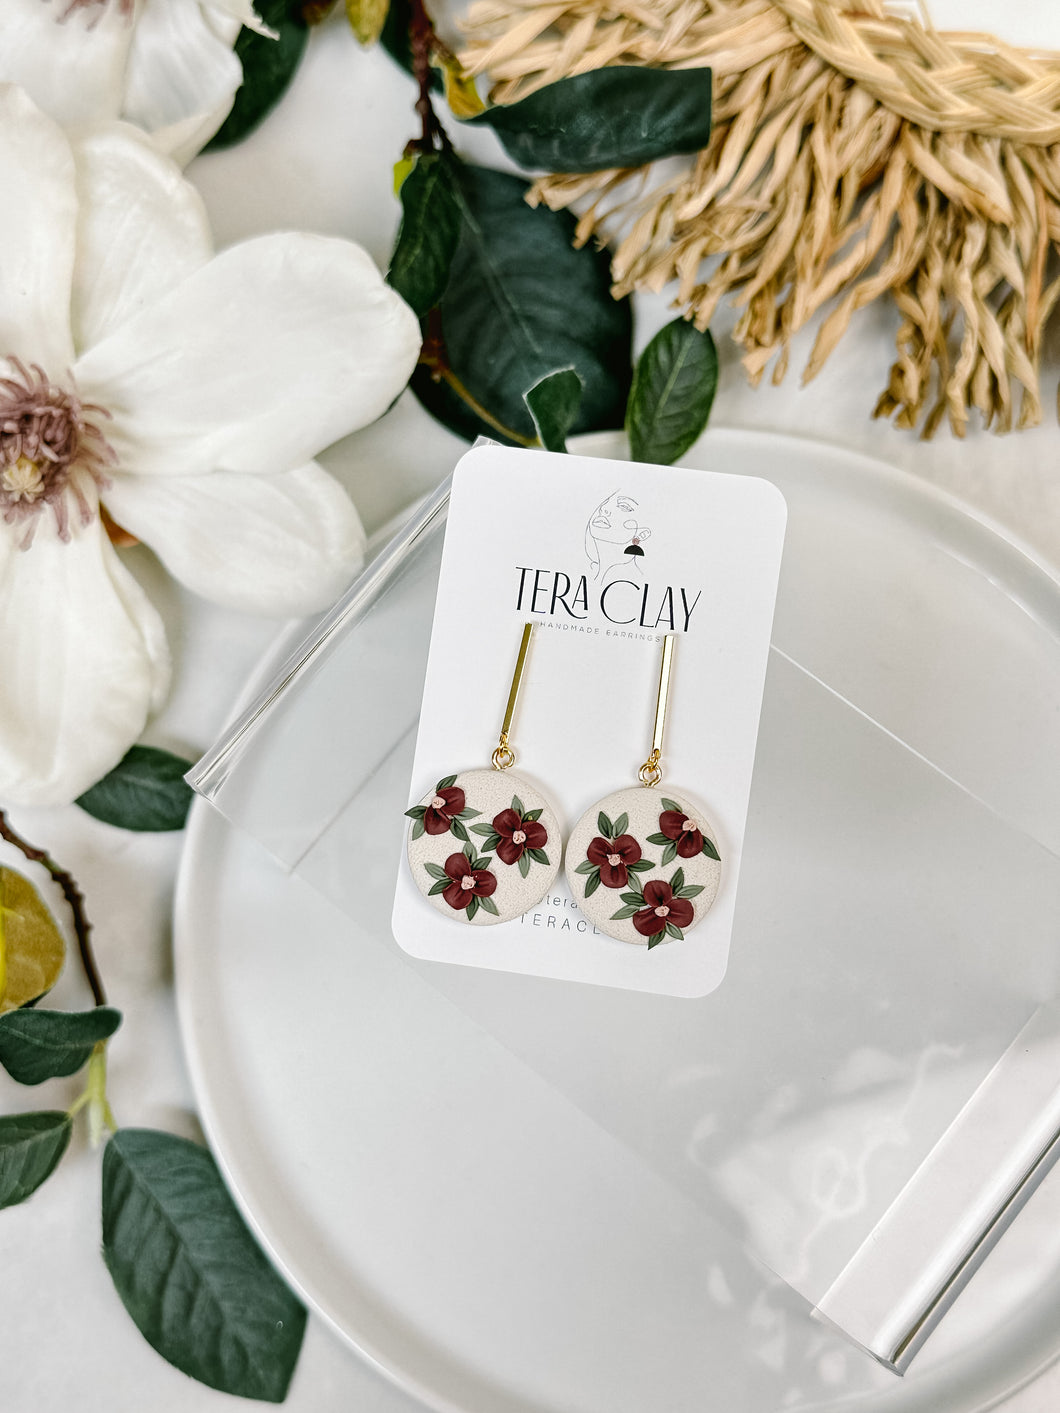 The Floral Dangles